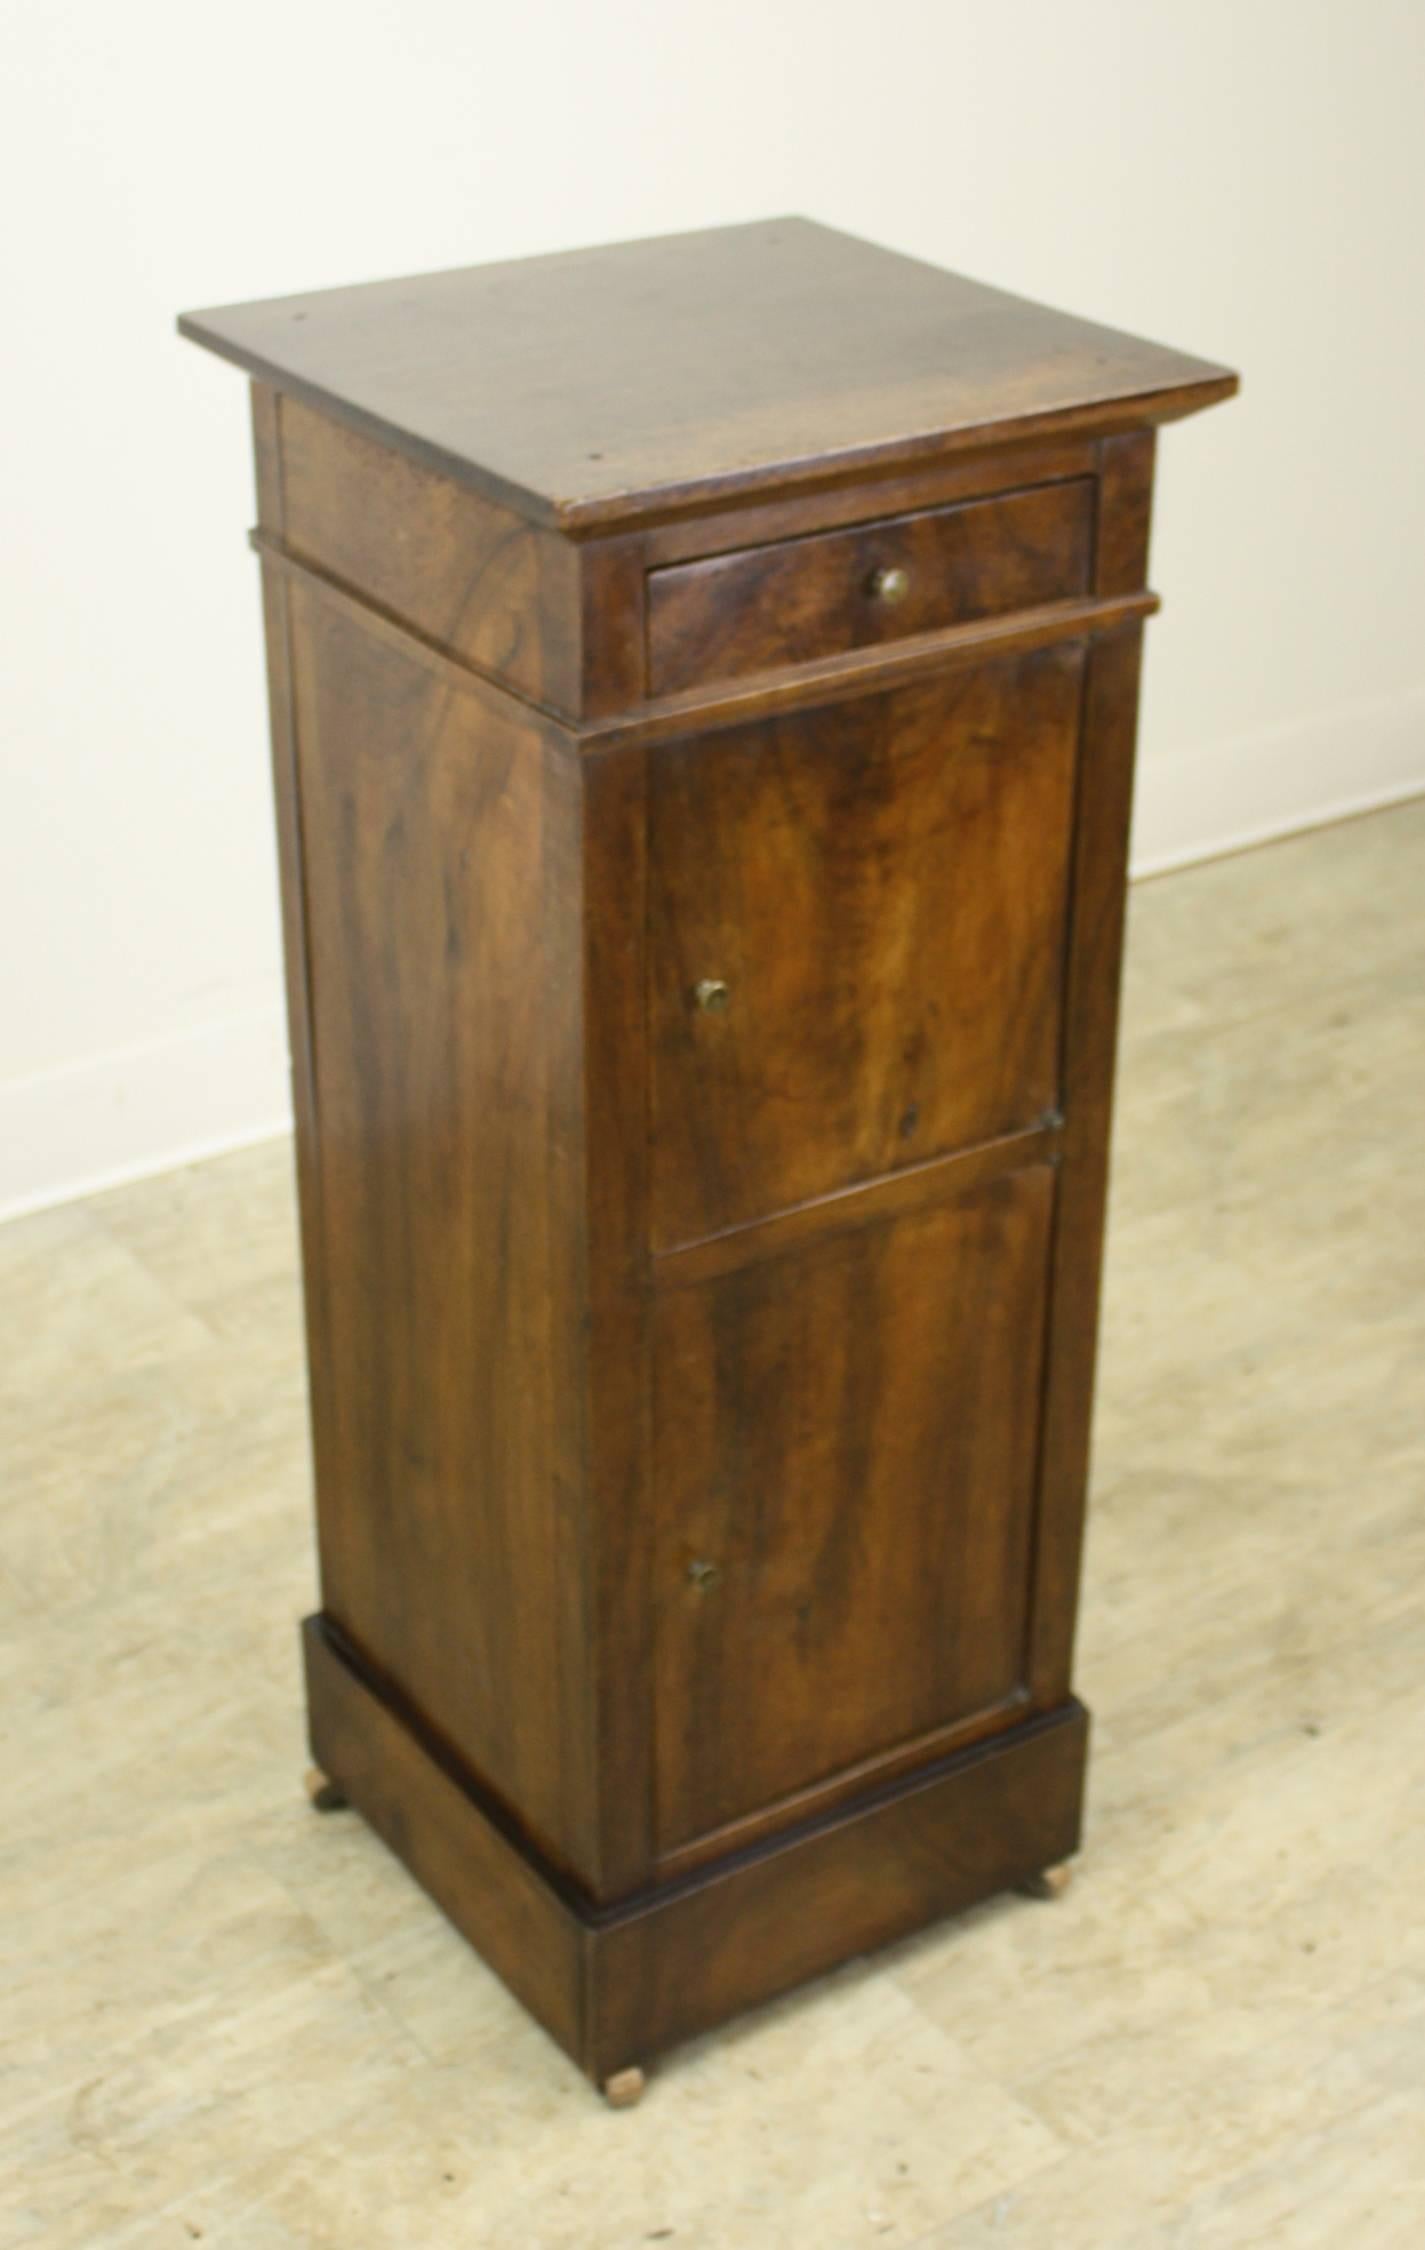 Small attractive cabinet with remarkable walnut grain. One sweet drawer over two cupboards. Decorative moulding and base completed by original wooden castors. Would work as a small lamp table.